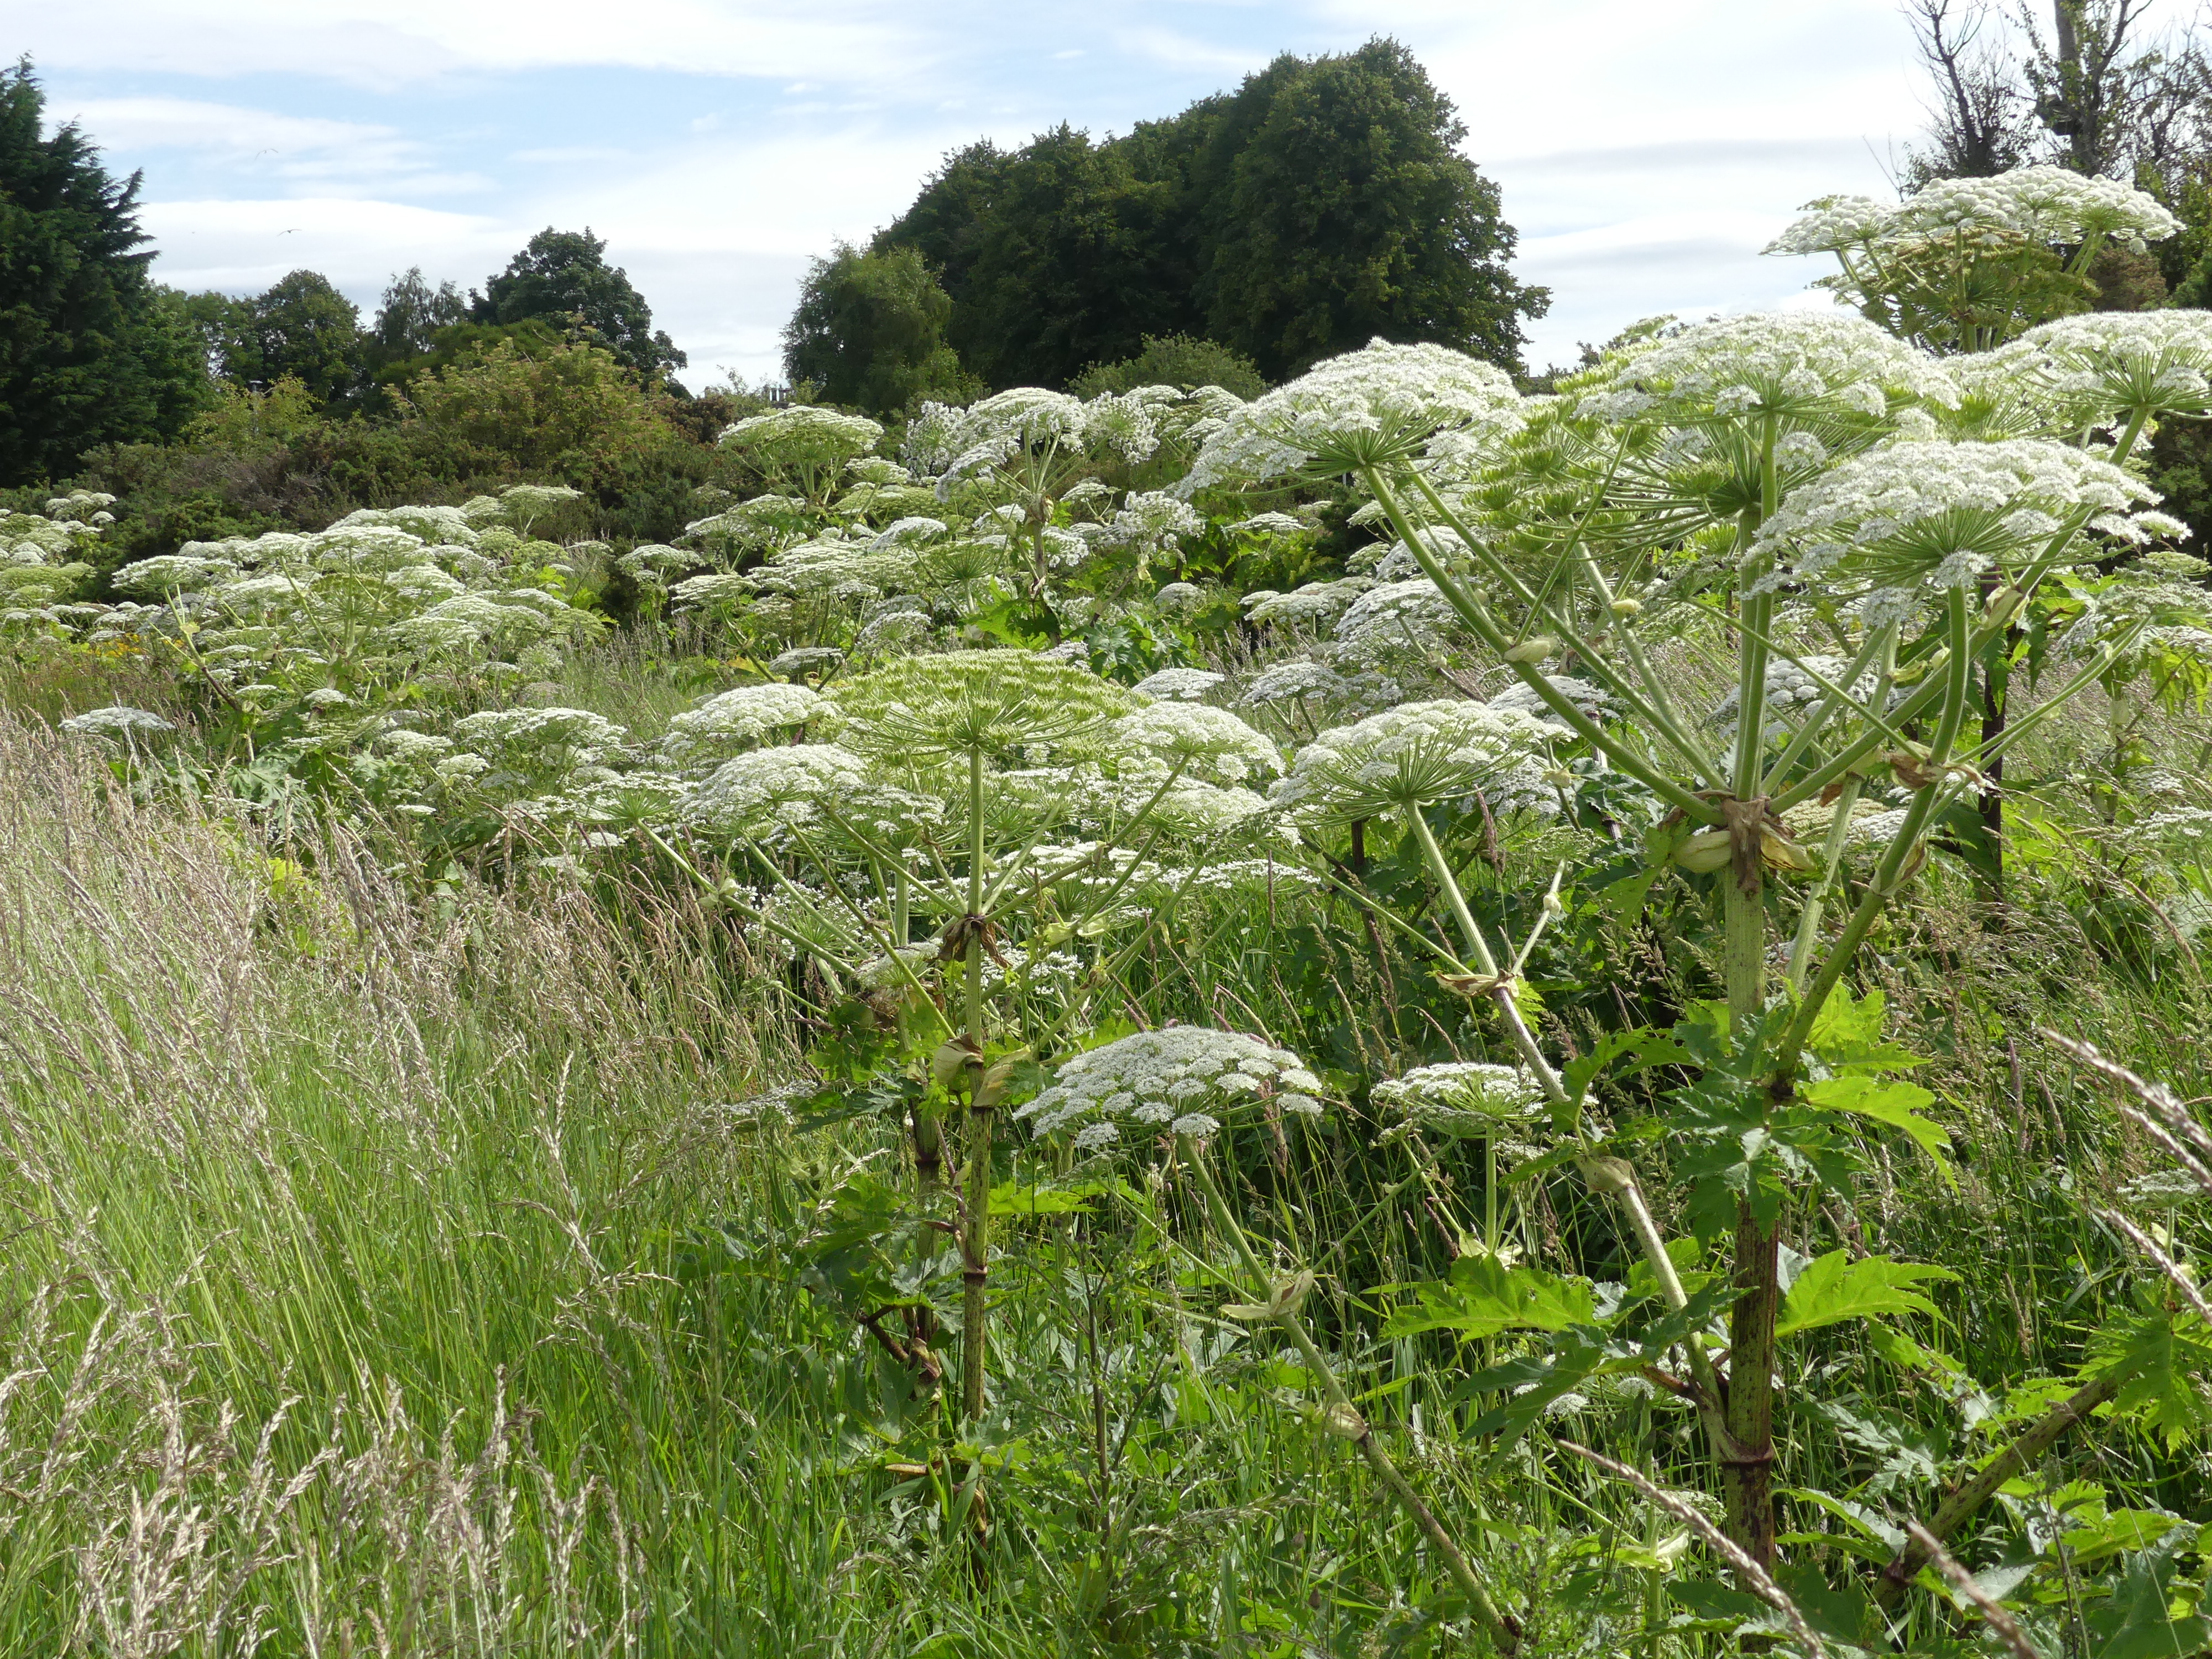 Several giant hogweed flower heads along line of fence